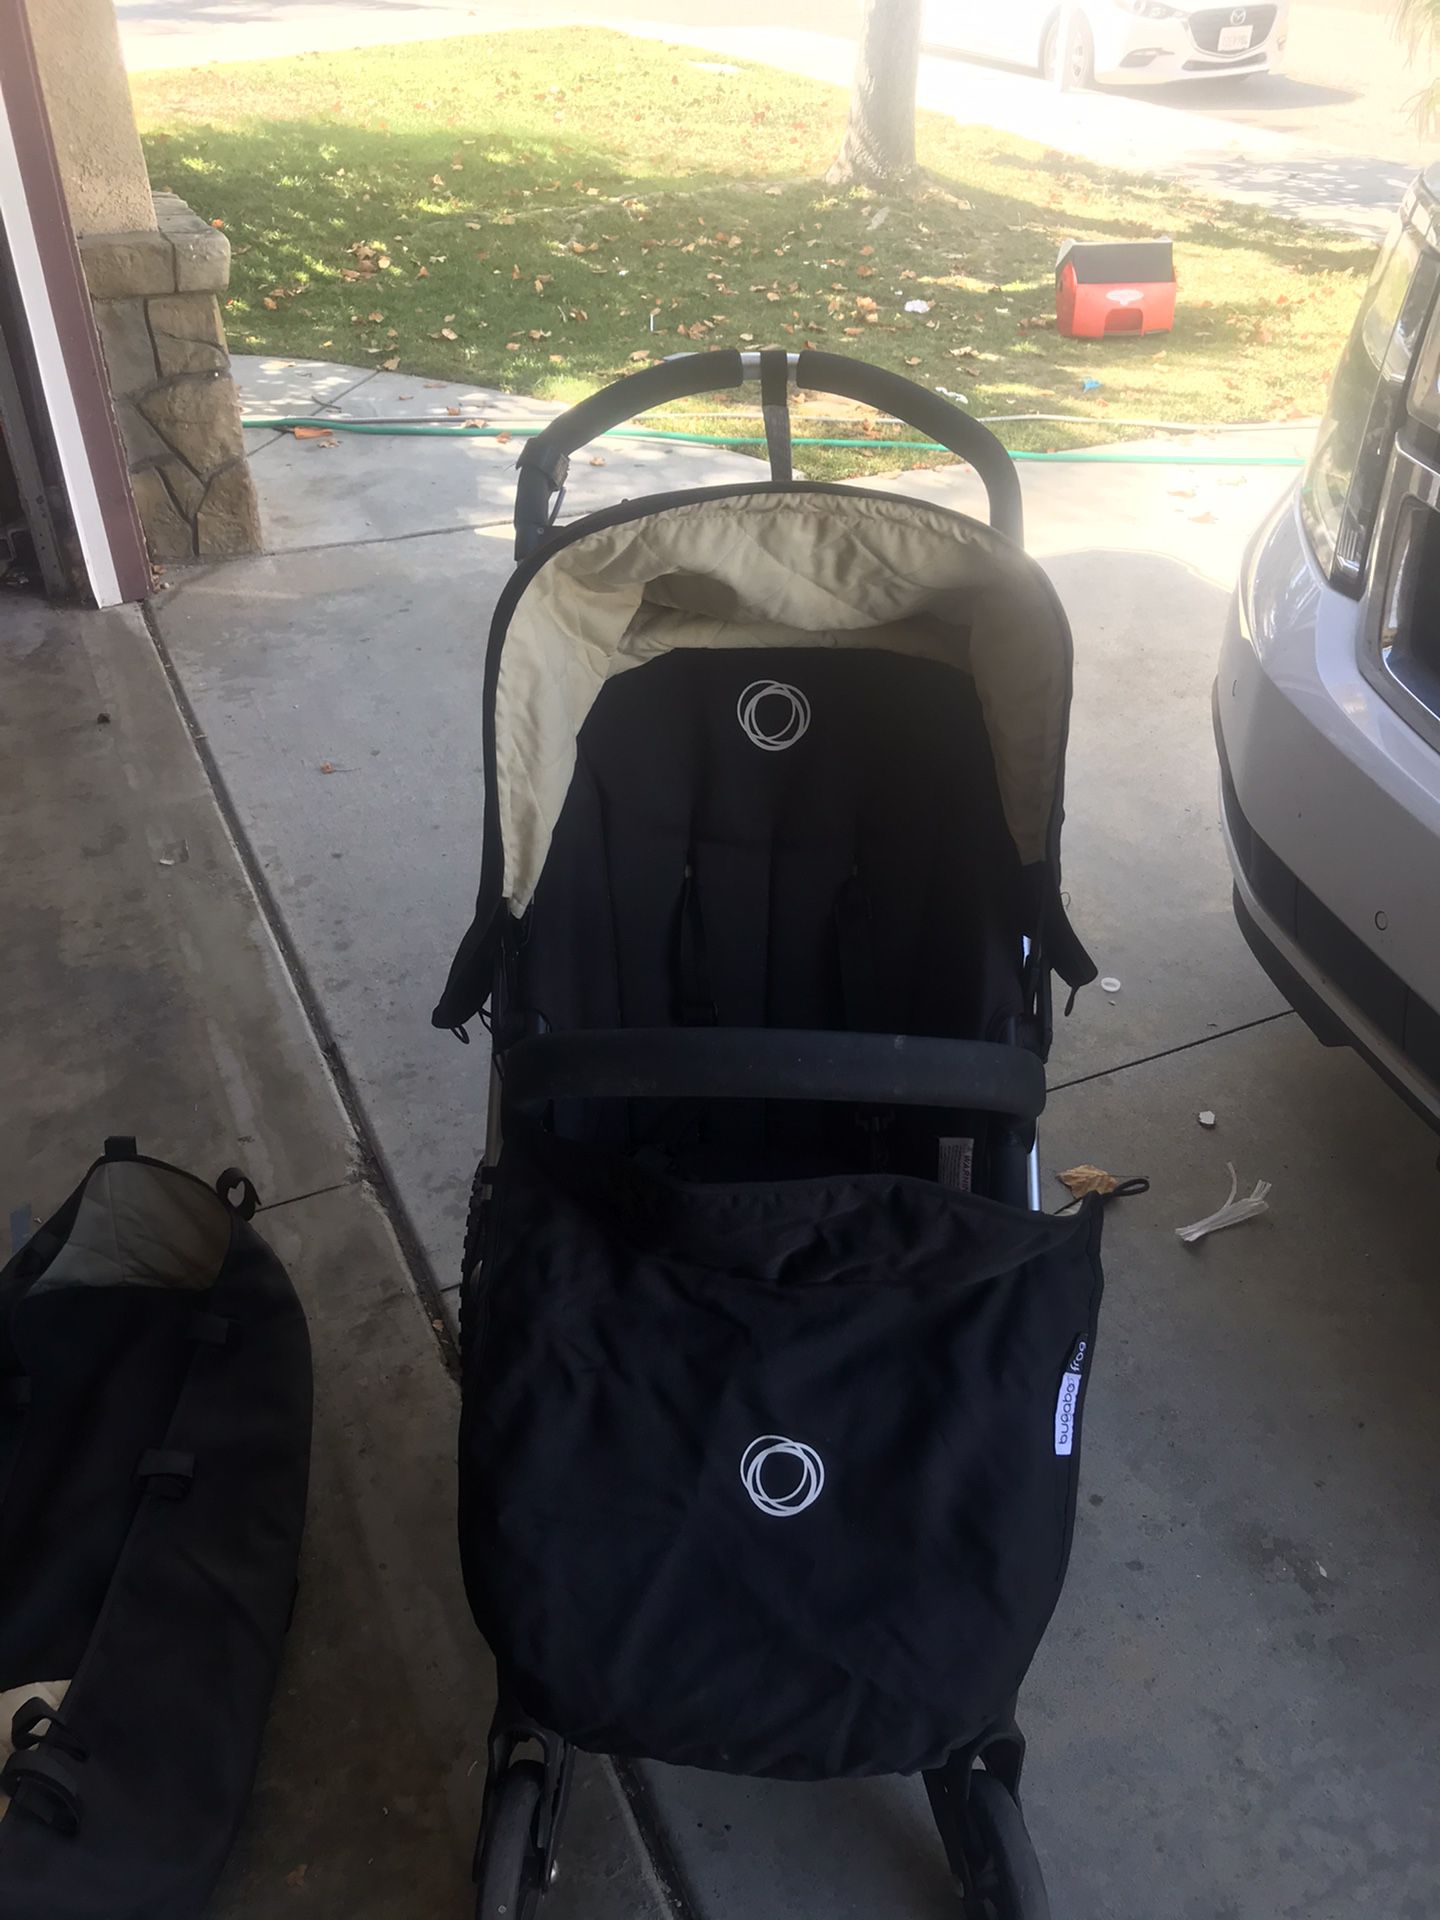 Bugaboo frog stroller with brand new bassinet